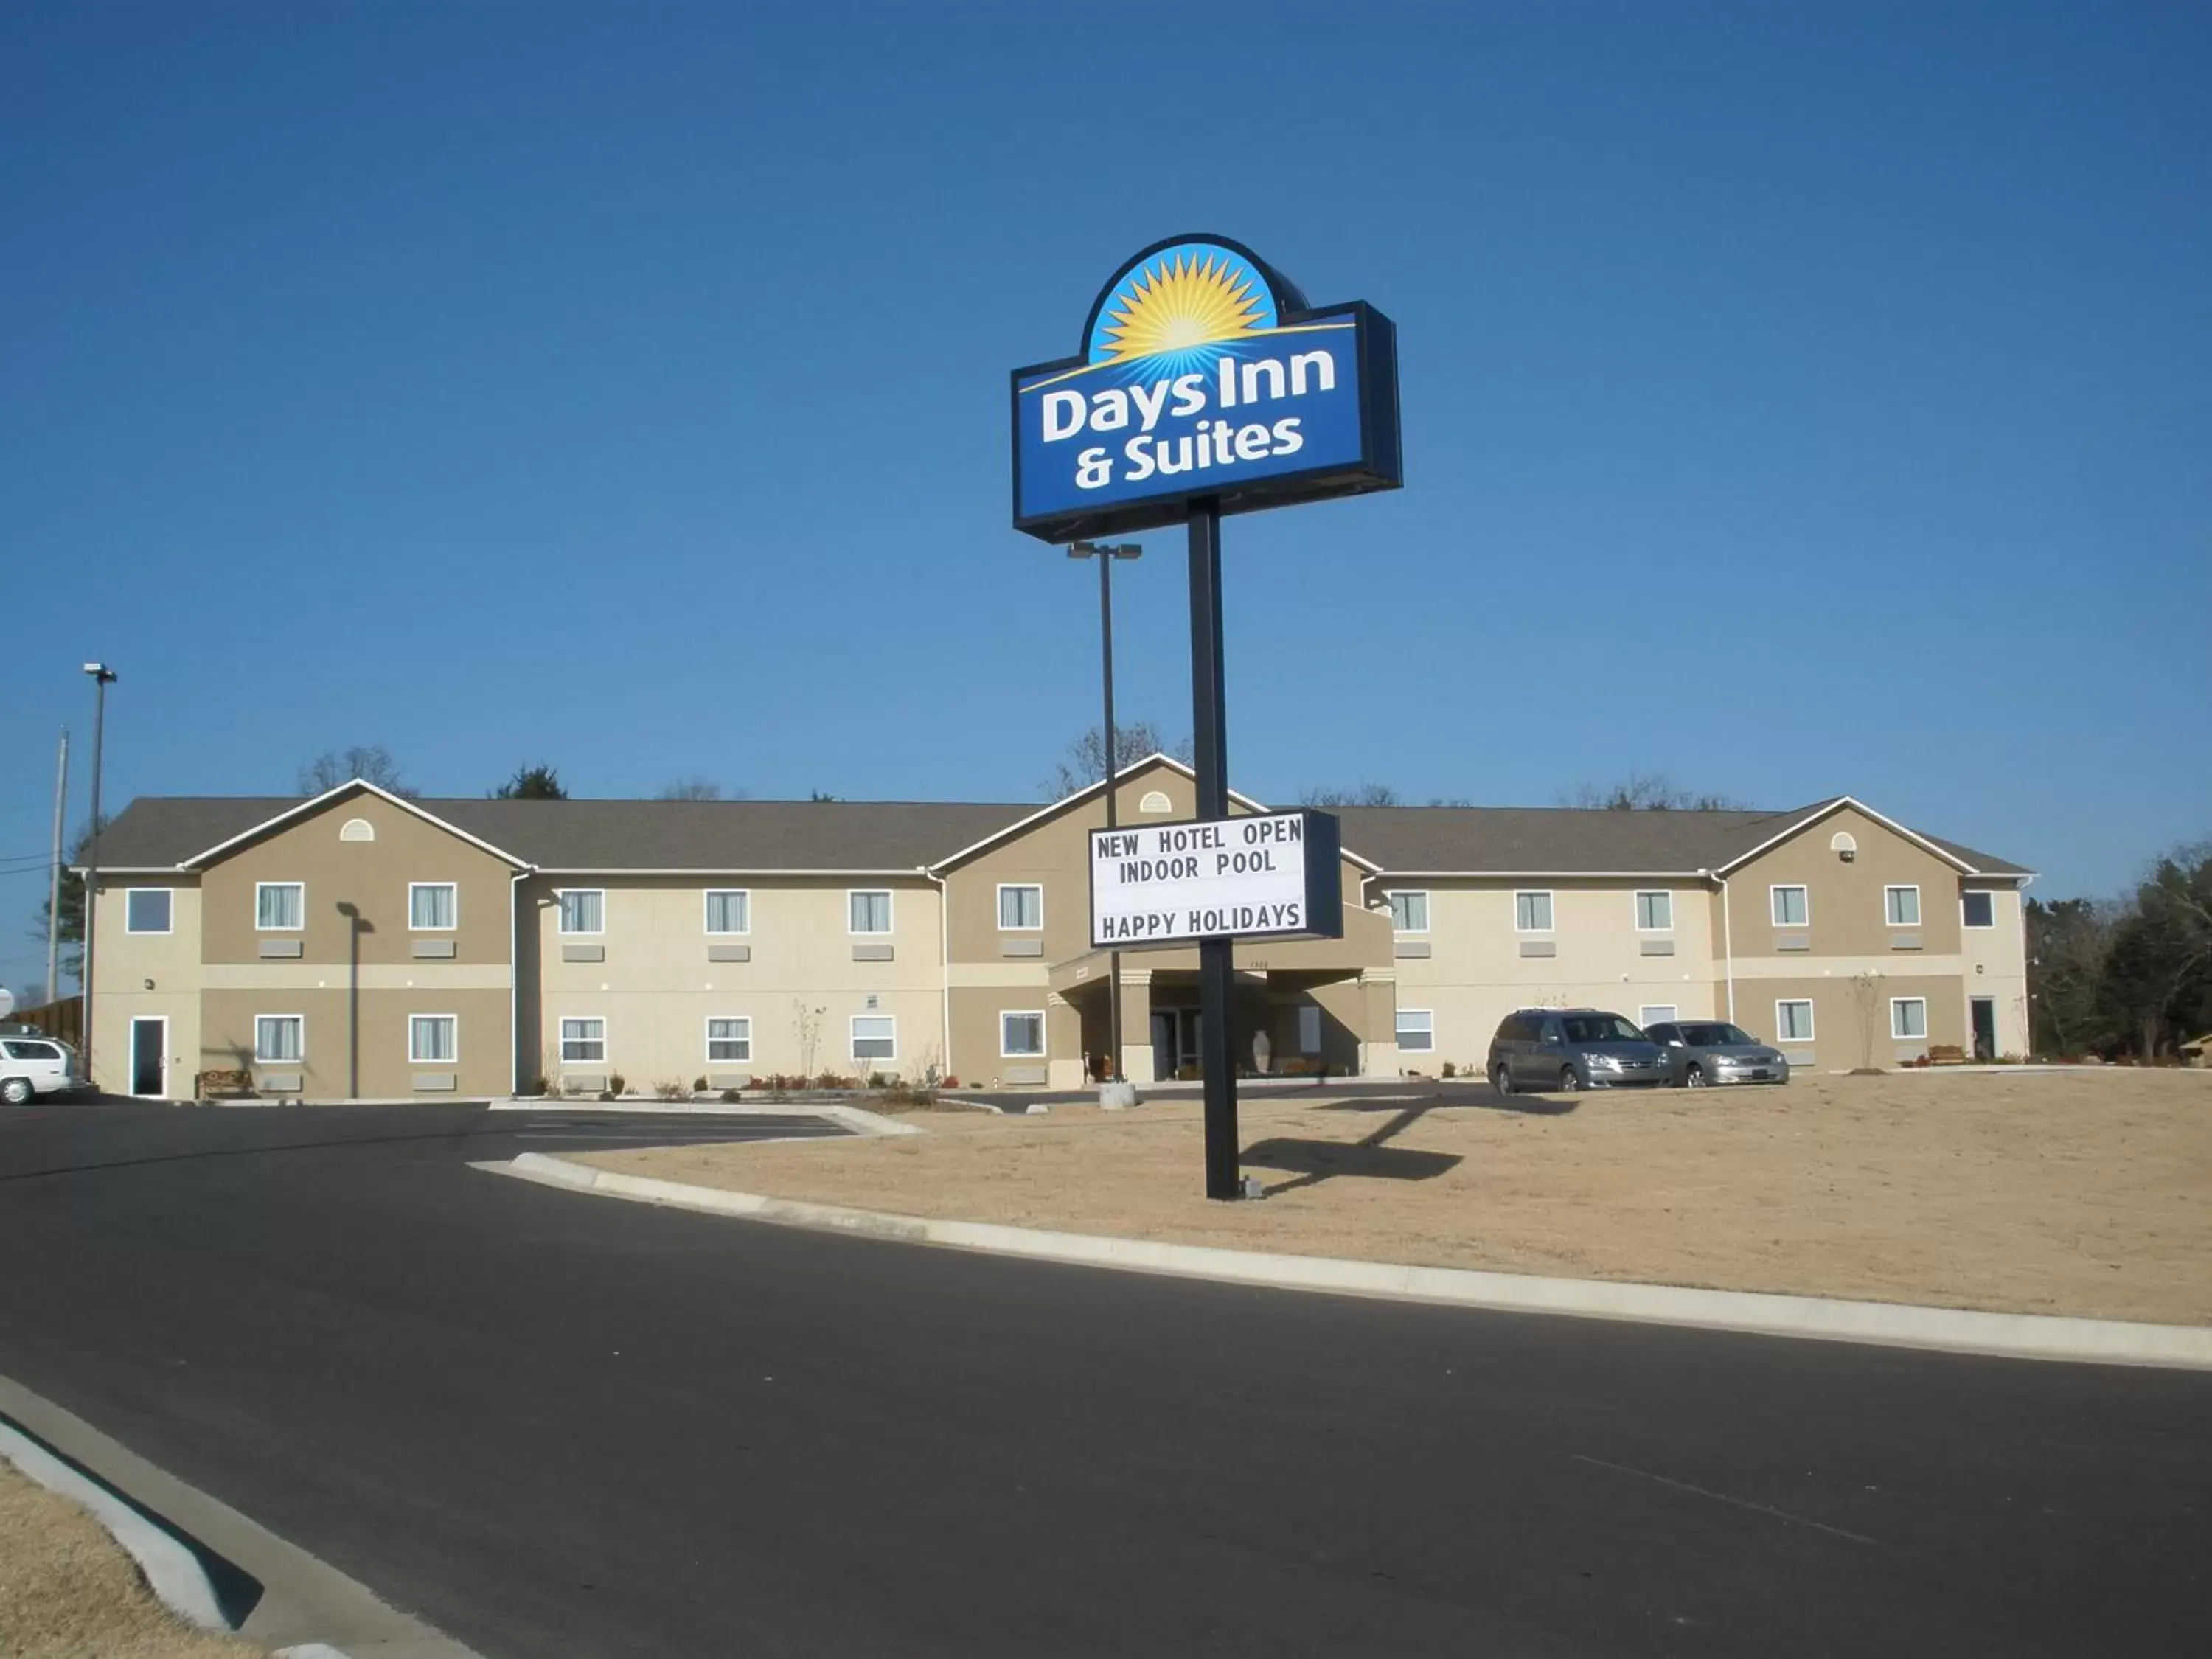 Property Building in Days Inn & Suites by Wyndham Cabot